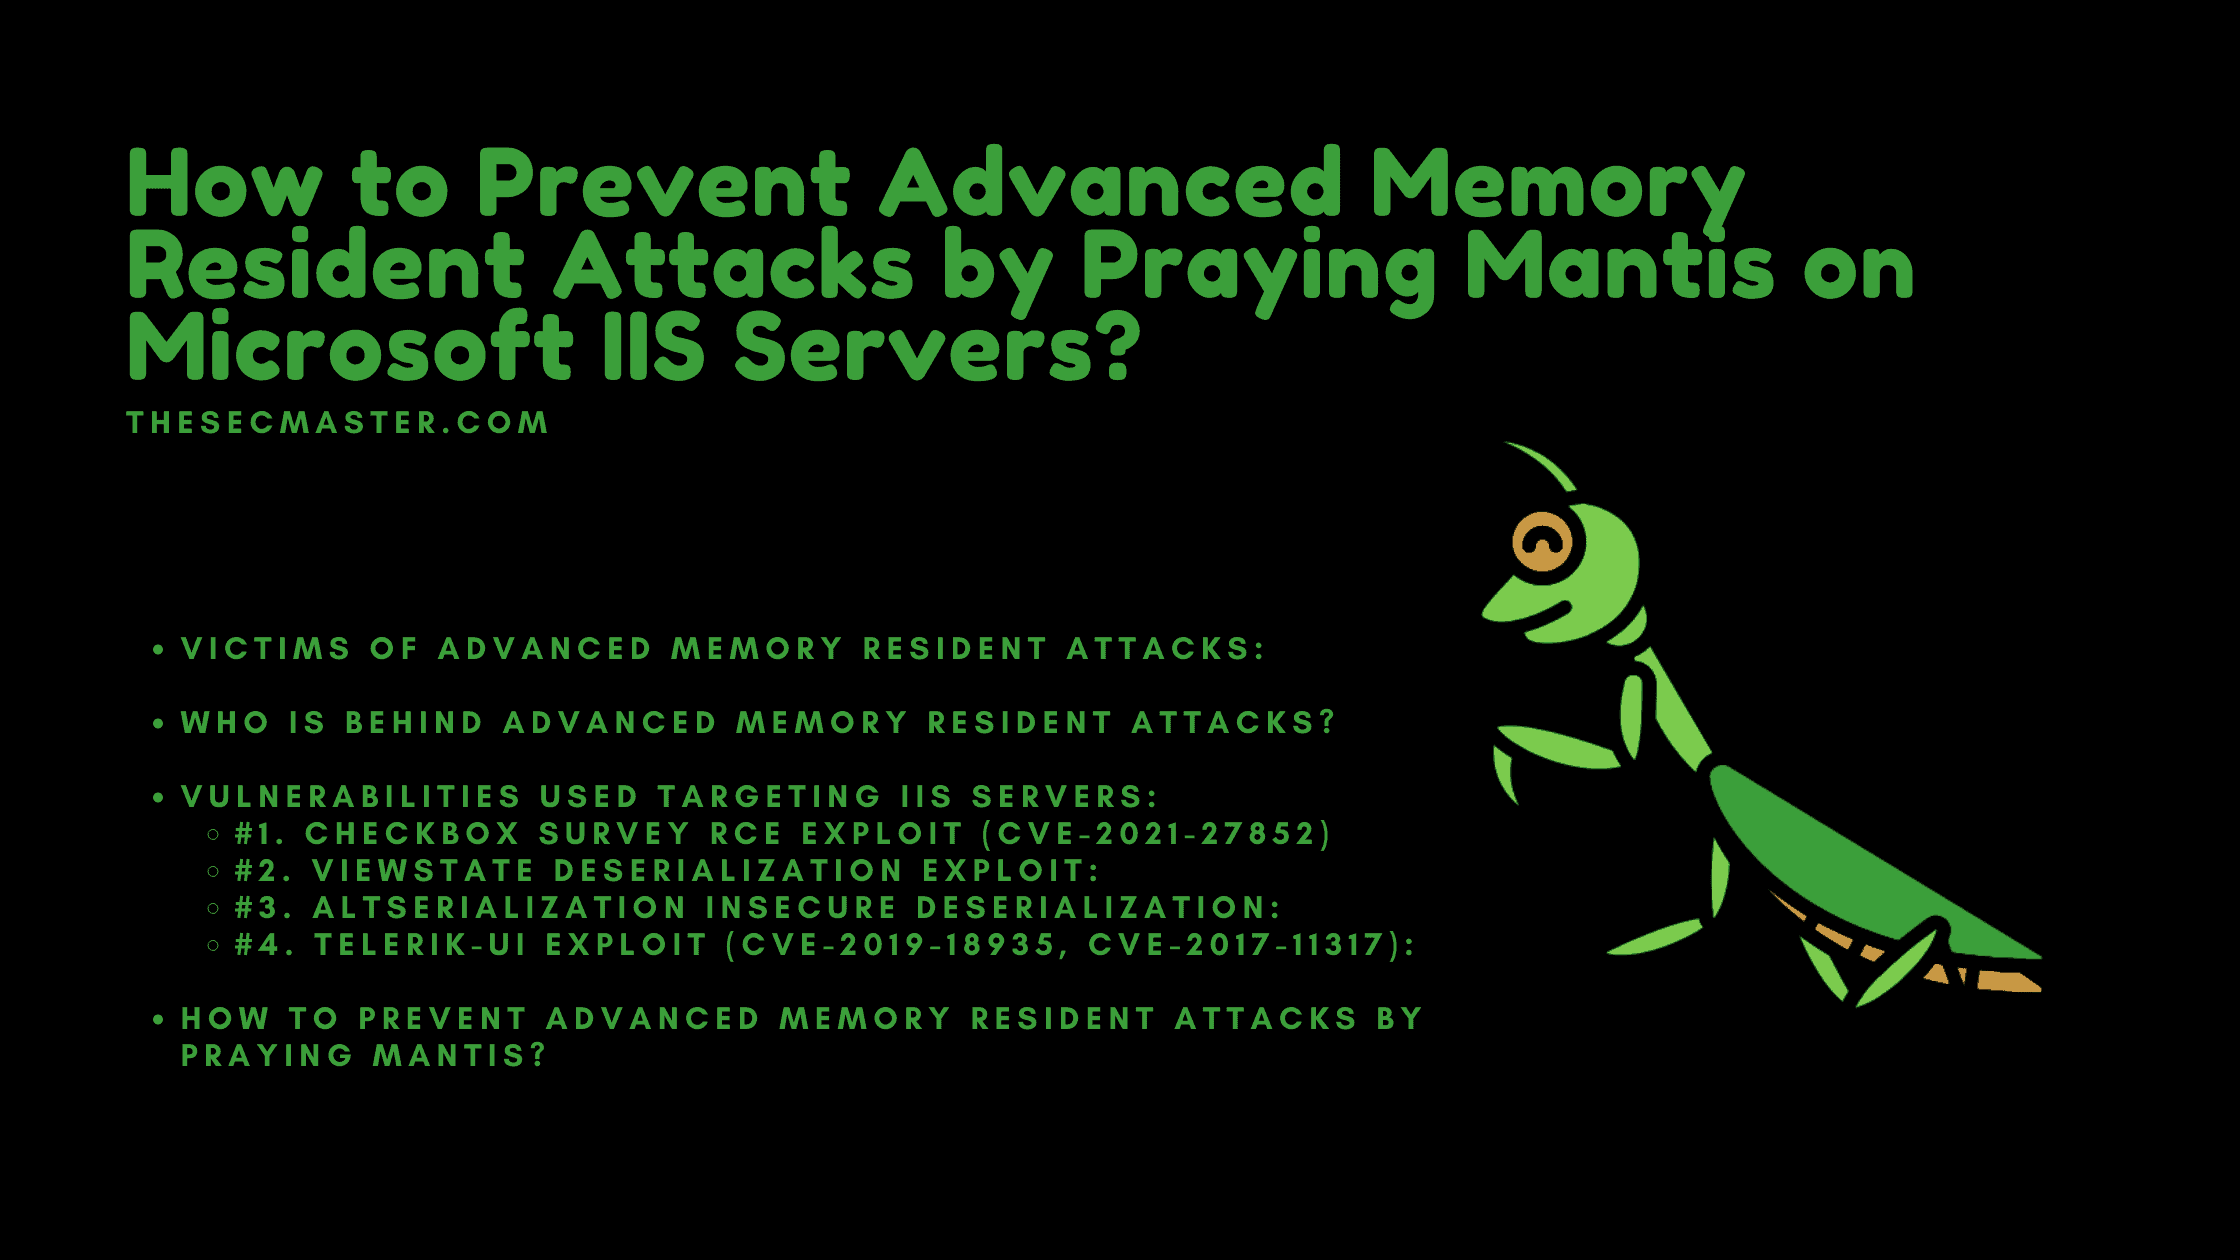 How To Prevent Advanced Memory Resident Attacks By Praying Mantis On Microsoft Iis Servers